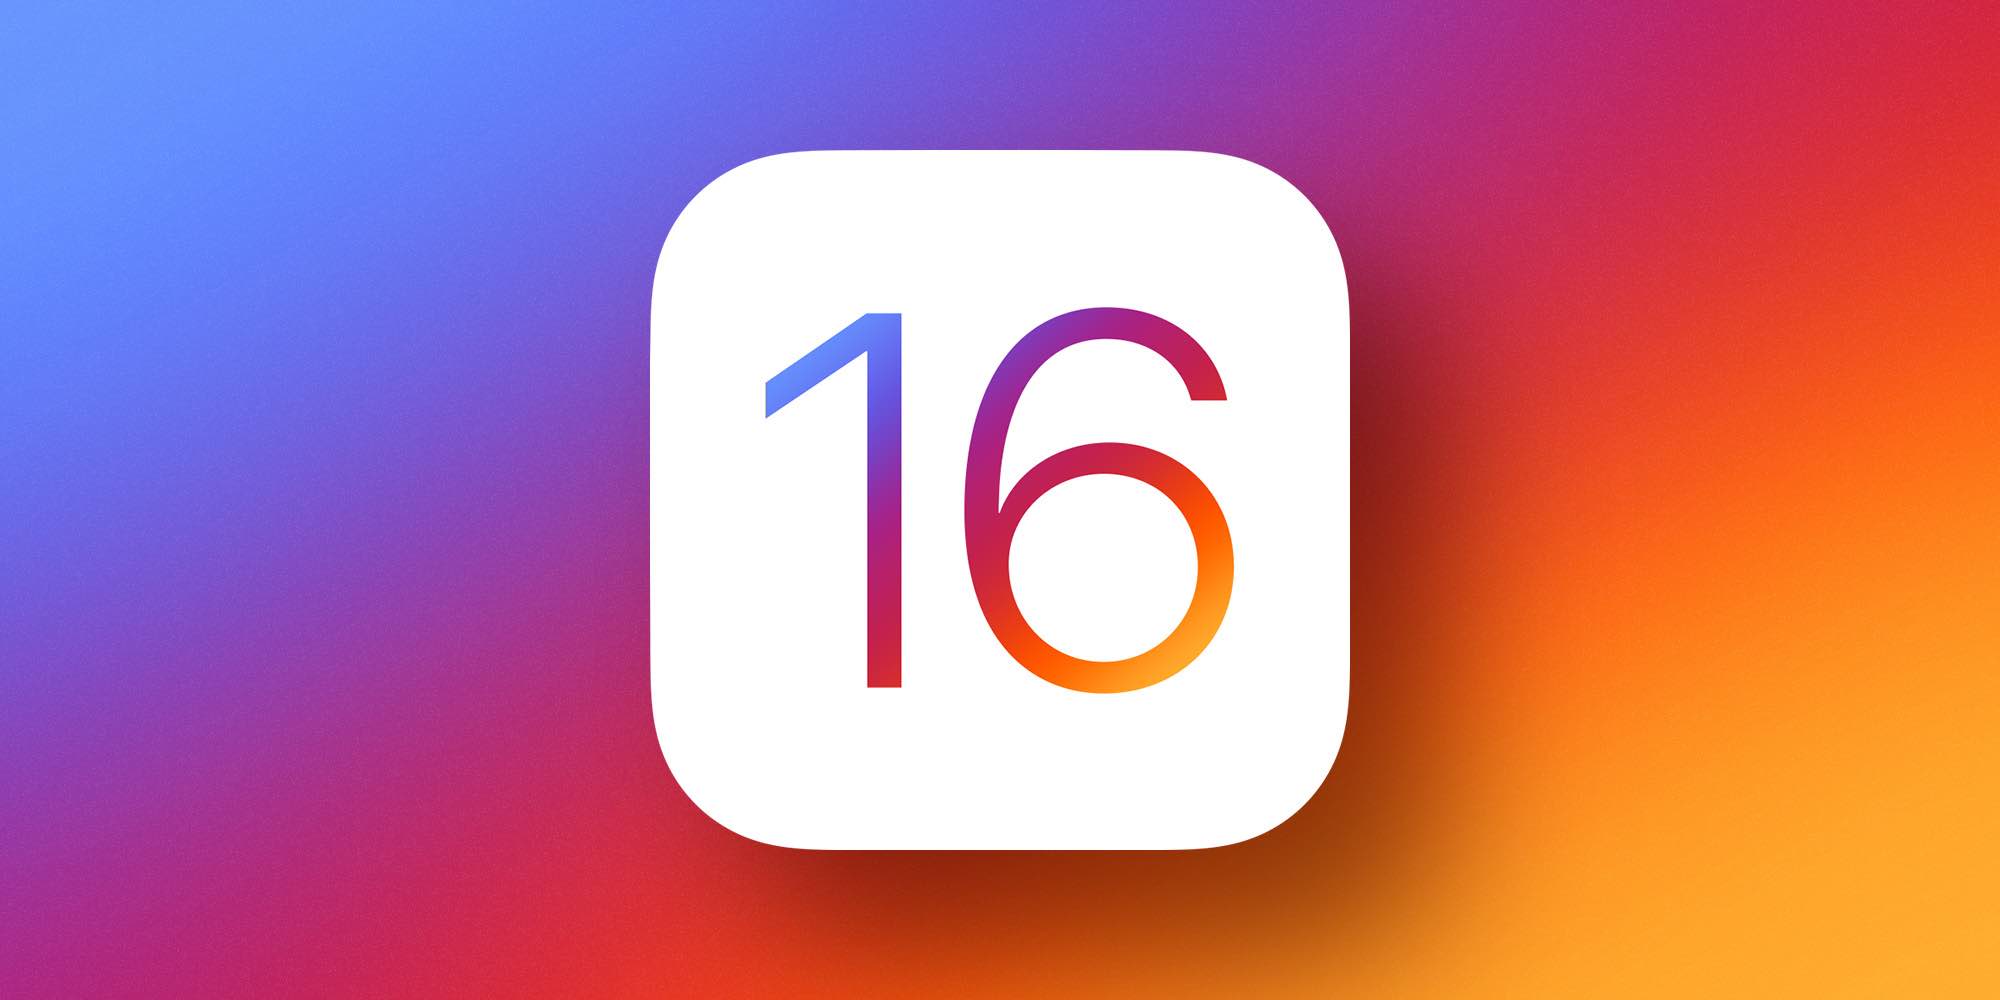 iOS 16 release date: Here’s when to expect the official launch